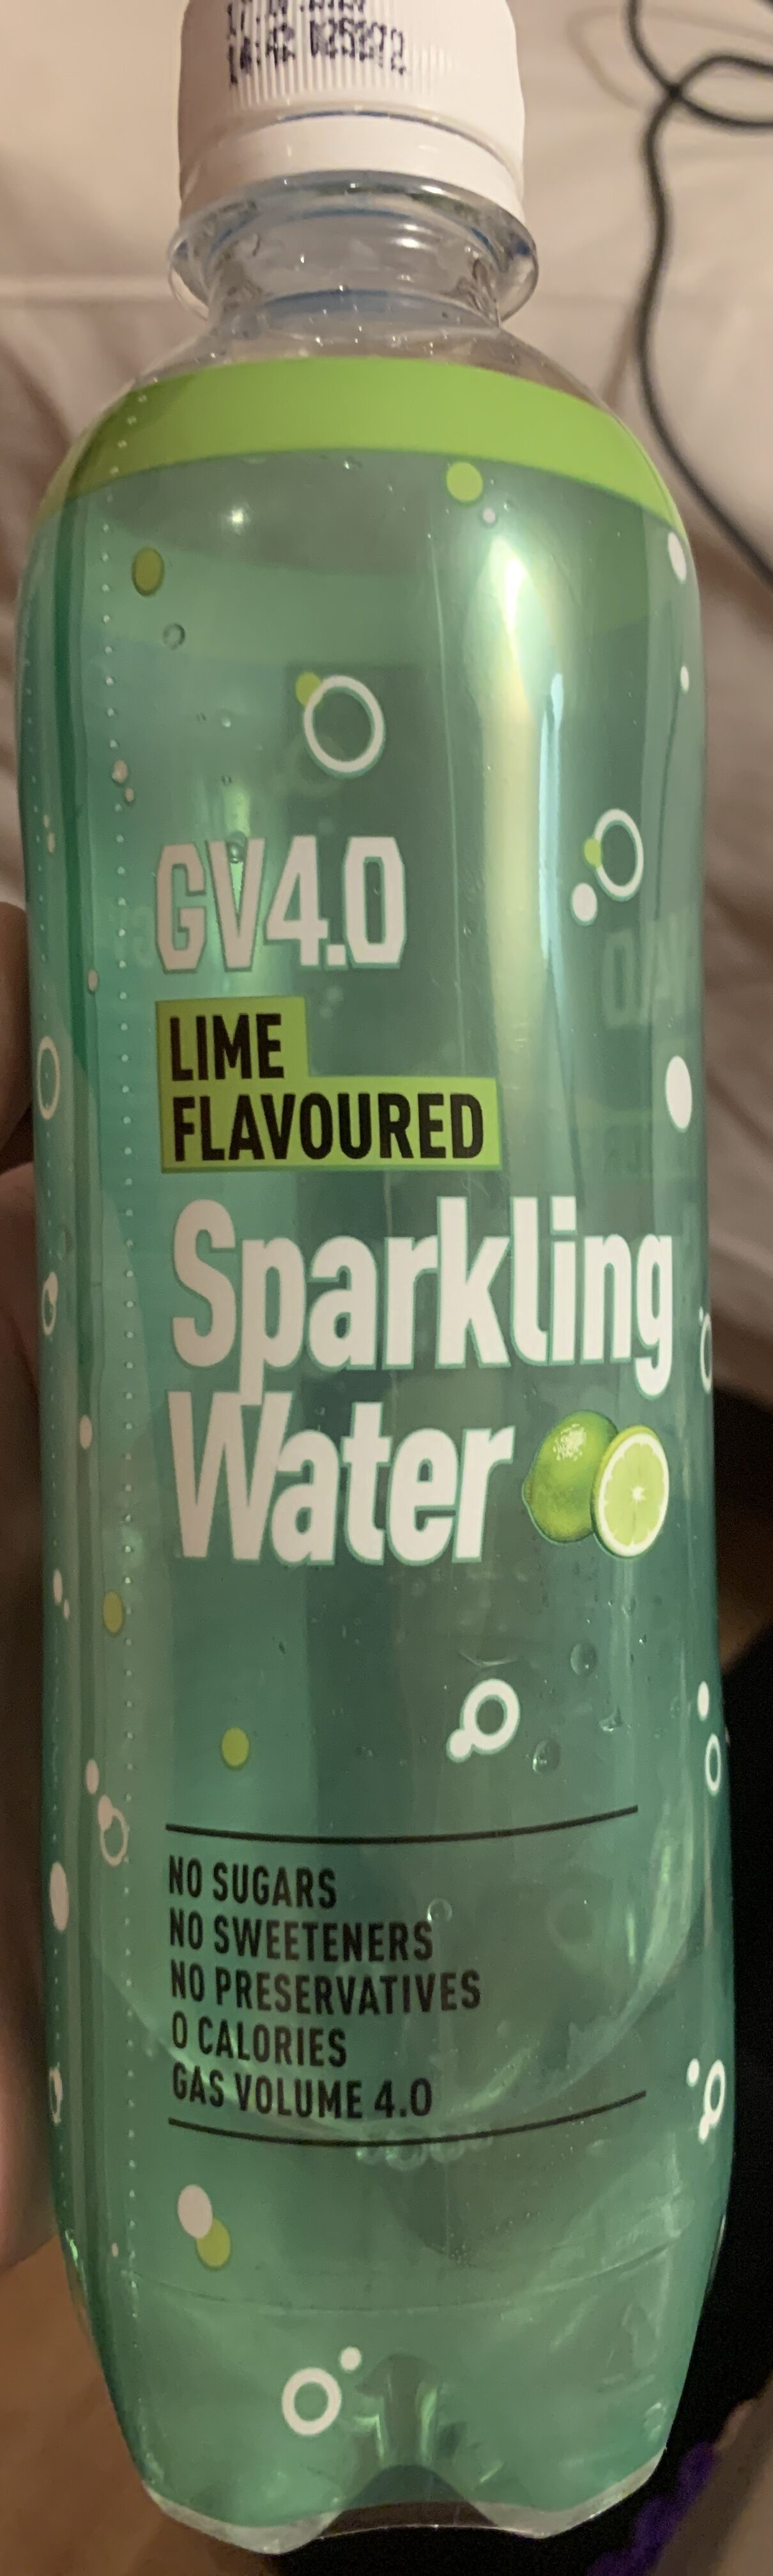 GV4.0 Lime Flavoured Sparkling Water - Producto - en